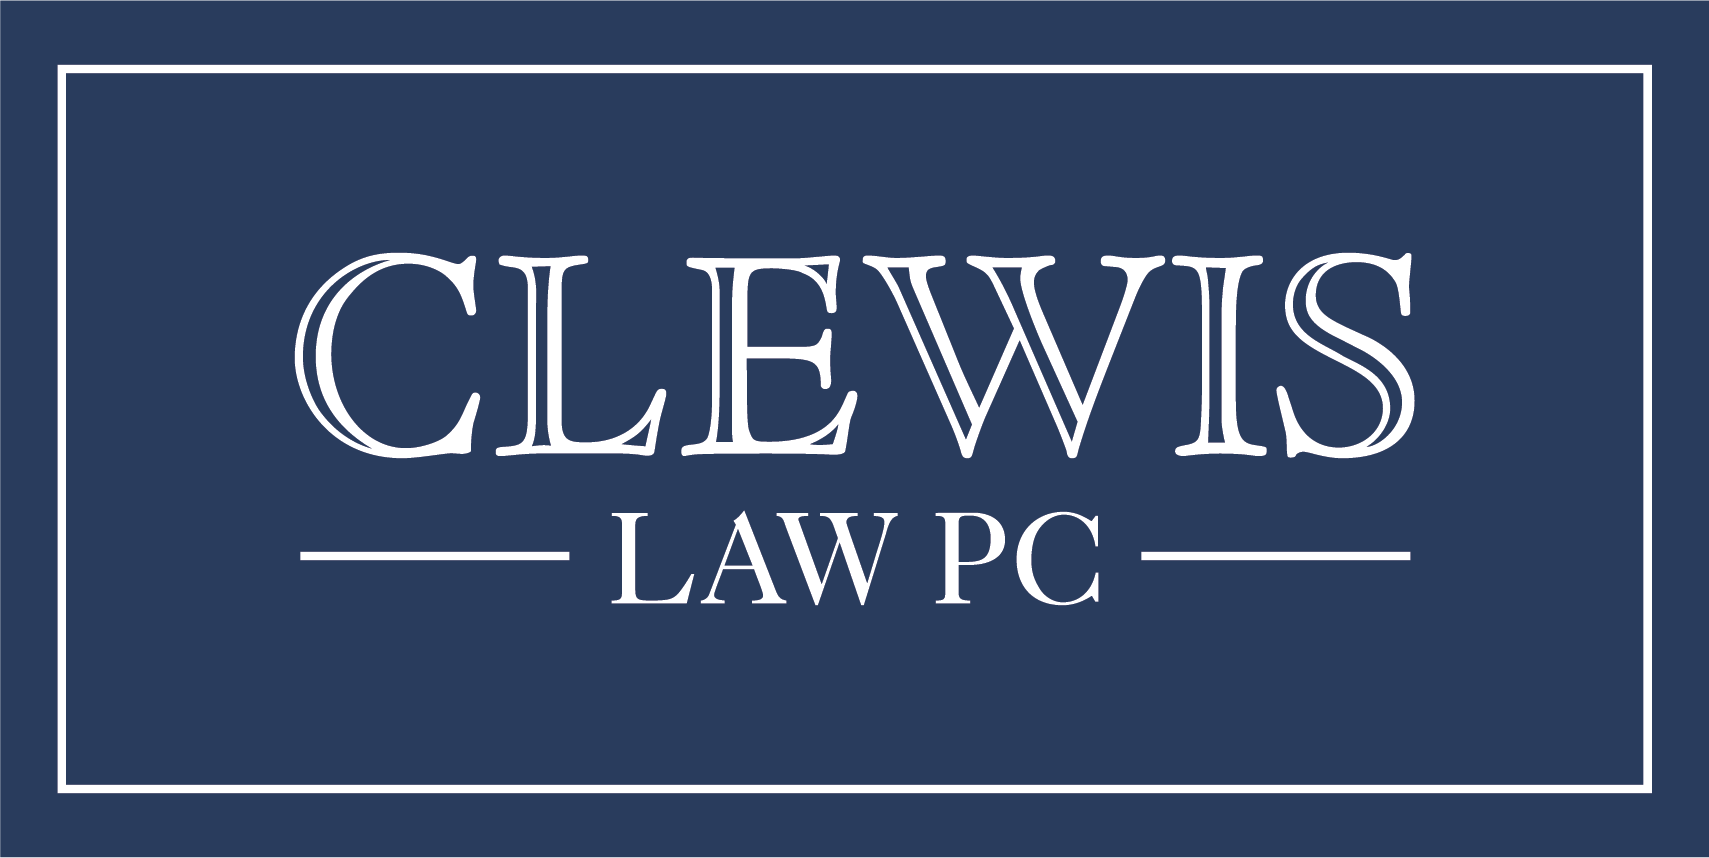 Clewis Law PC